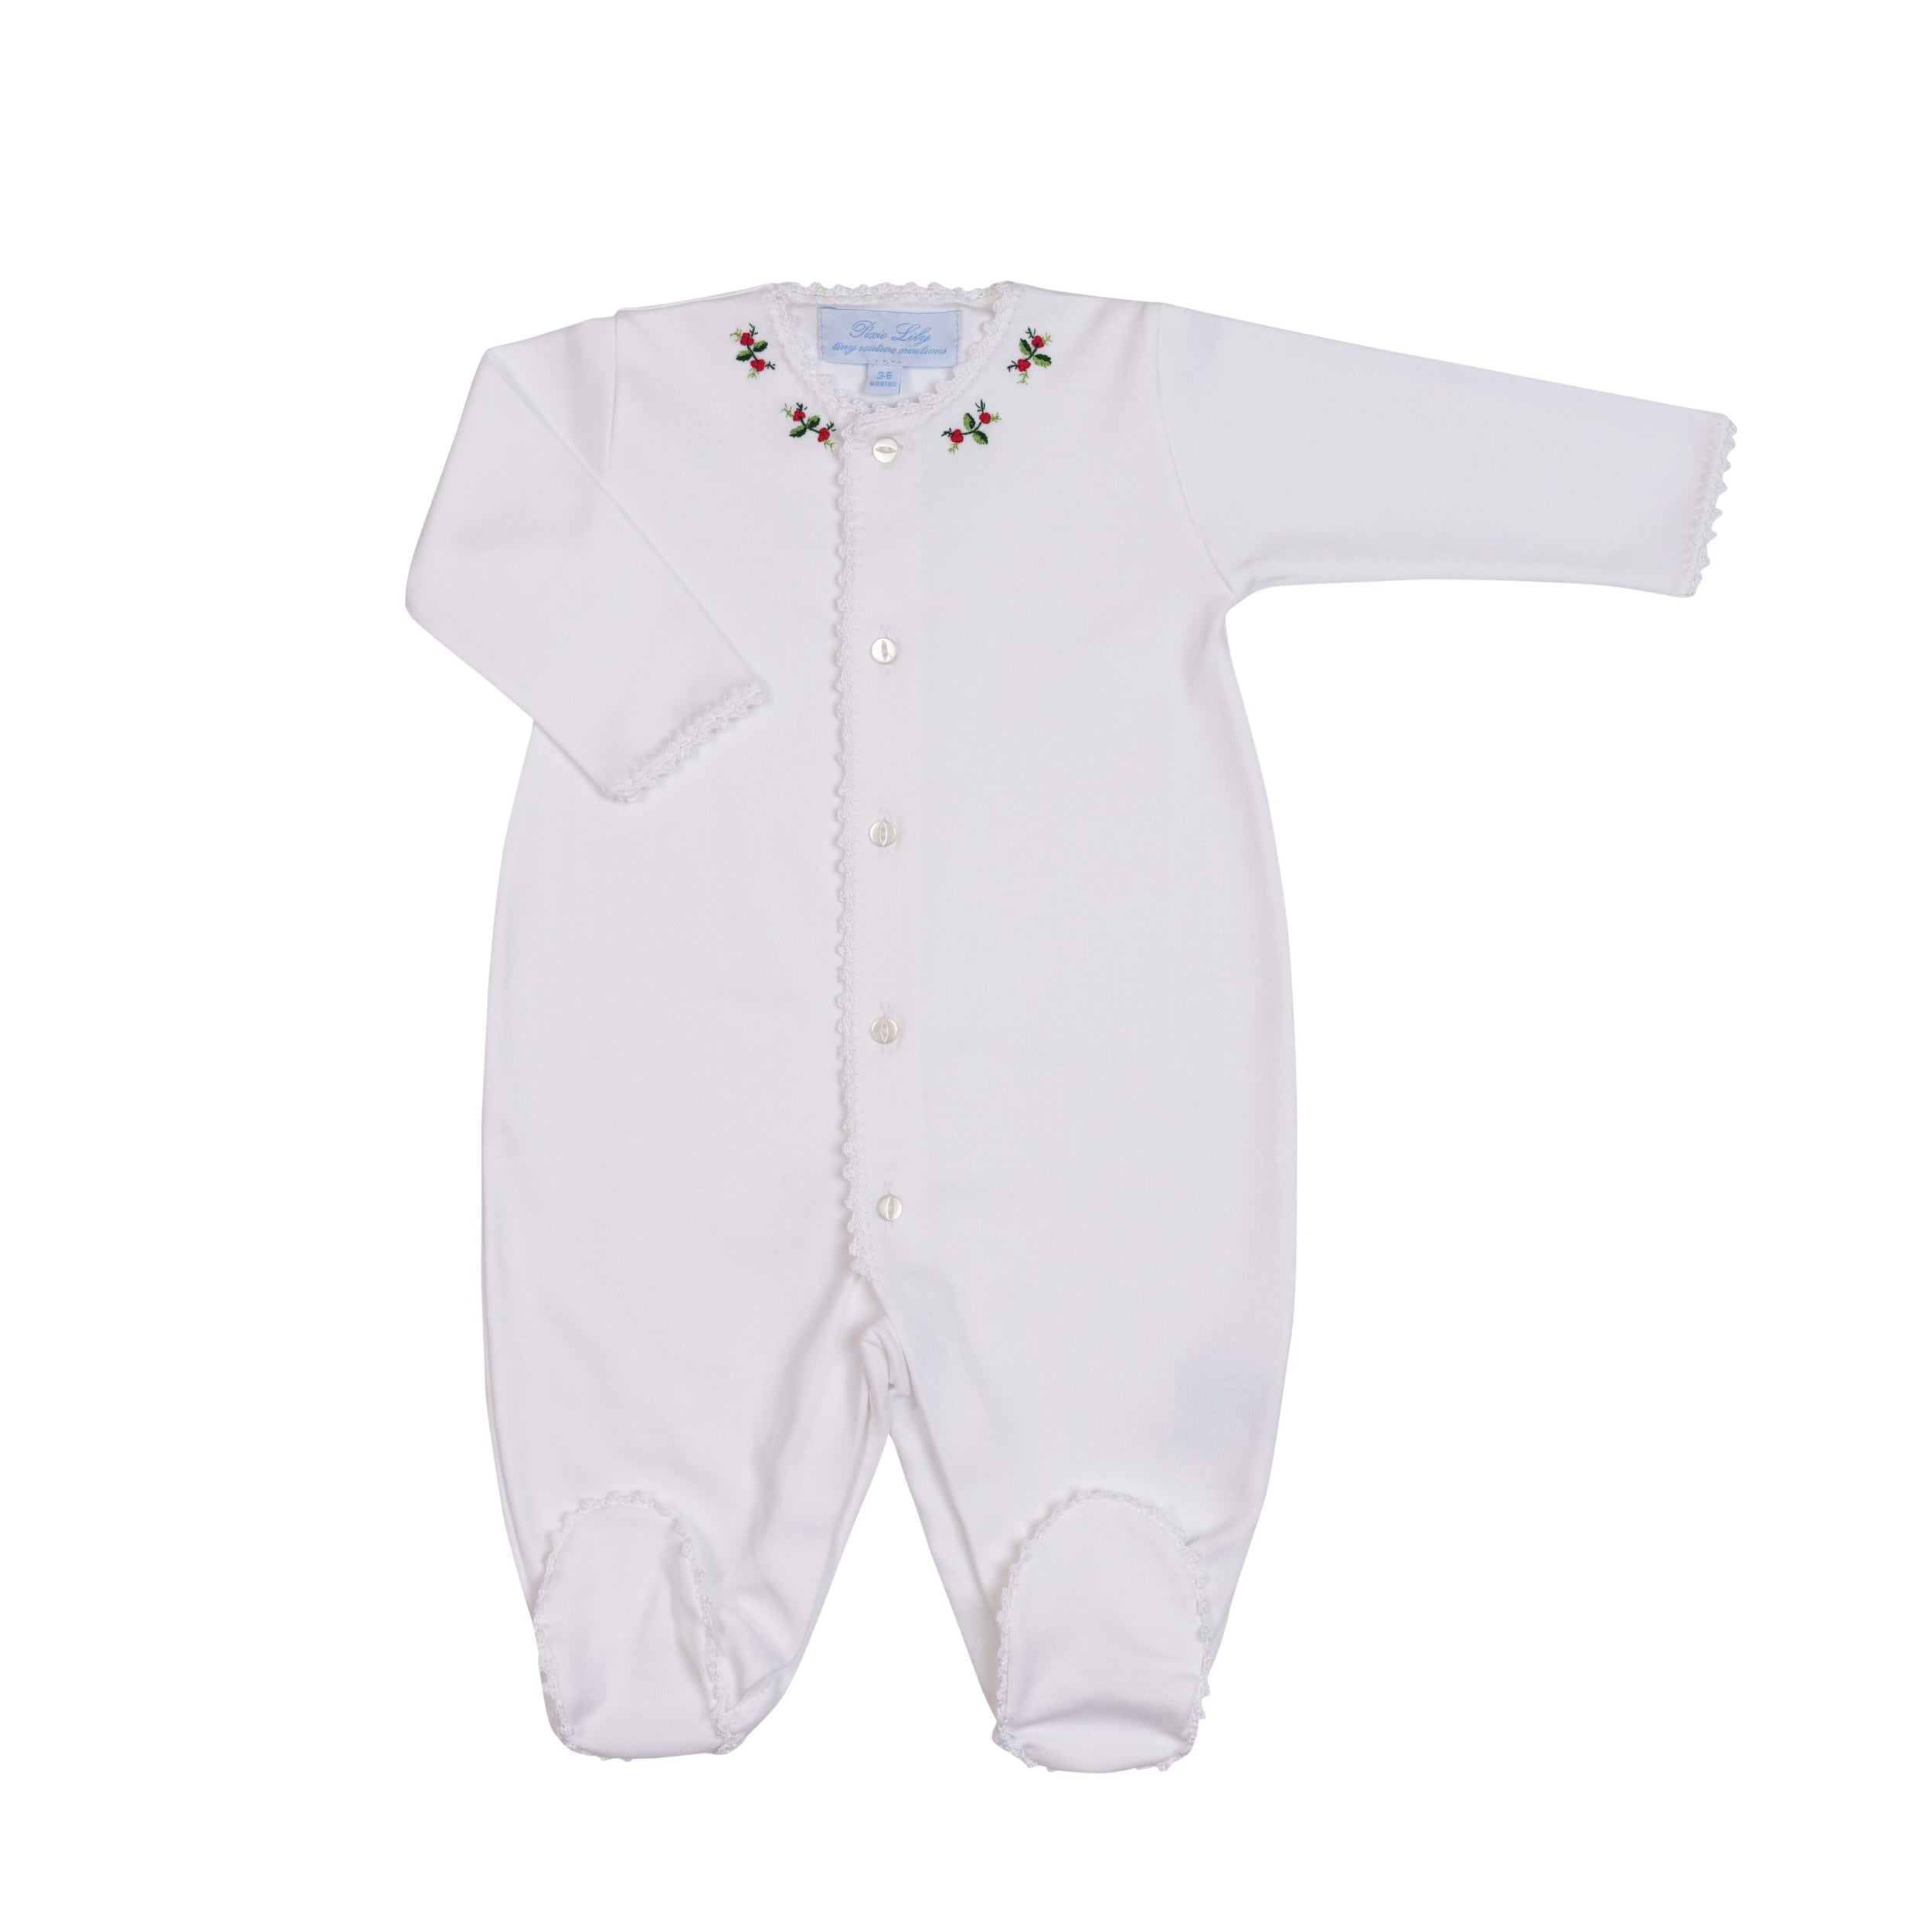 Holly Footie (Infant)